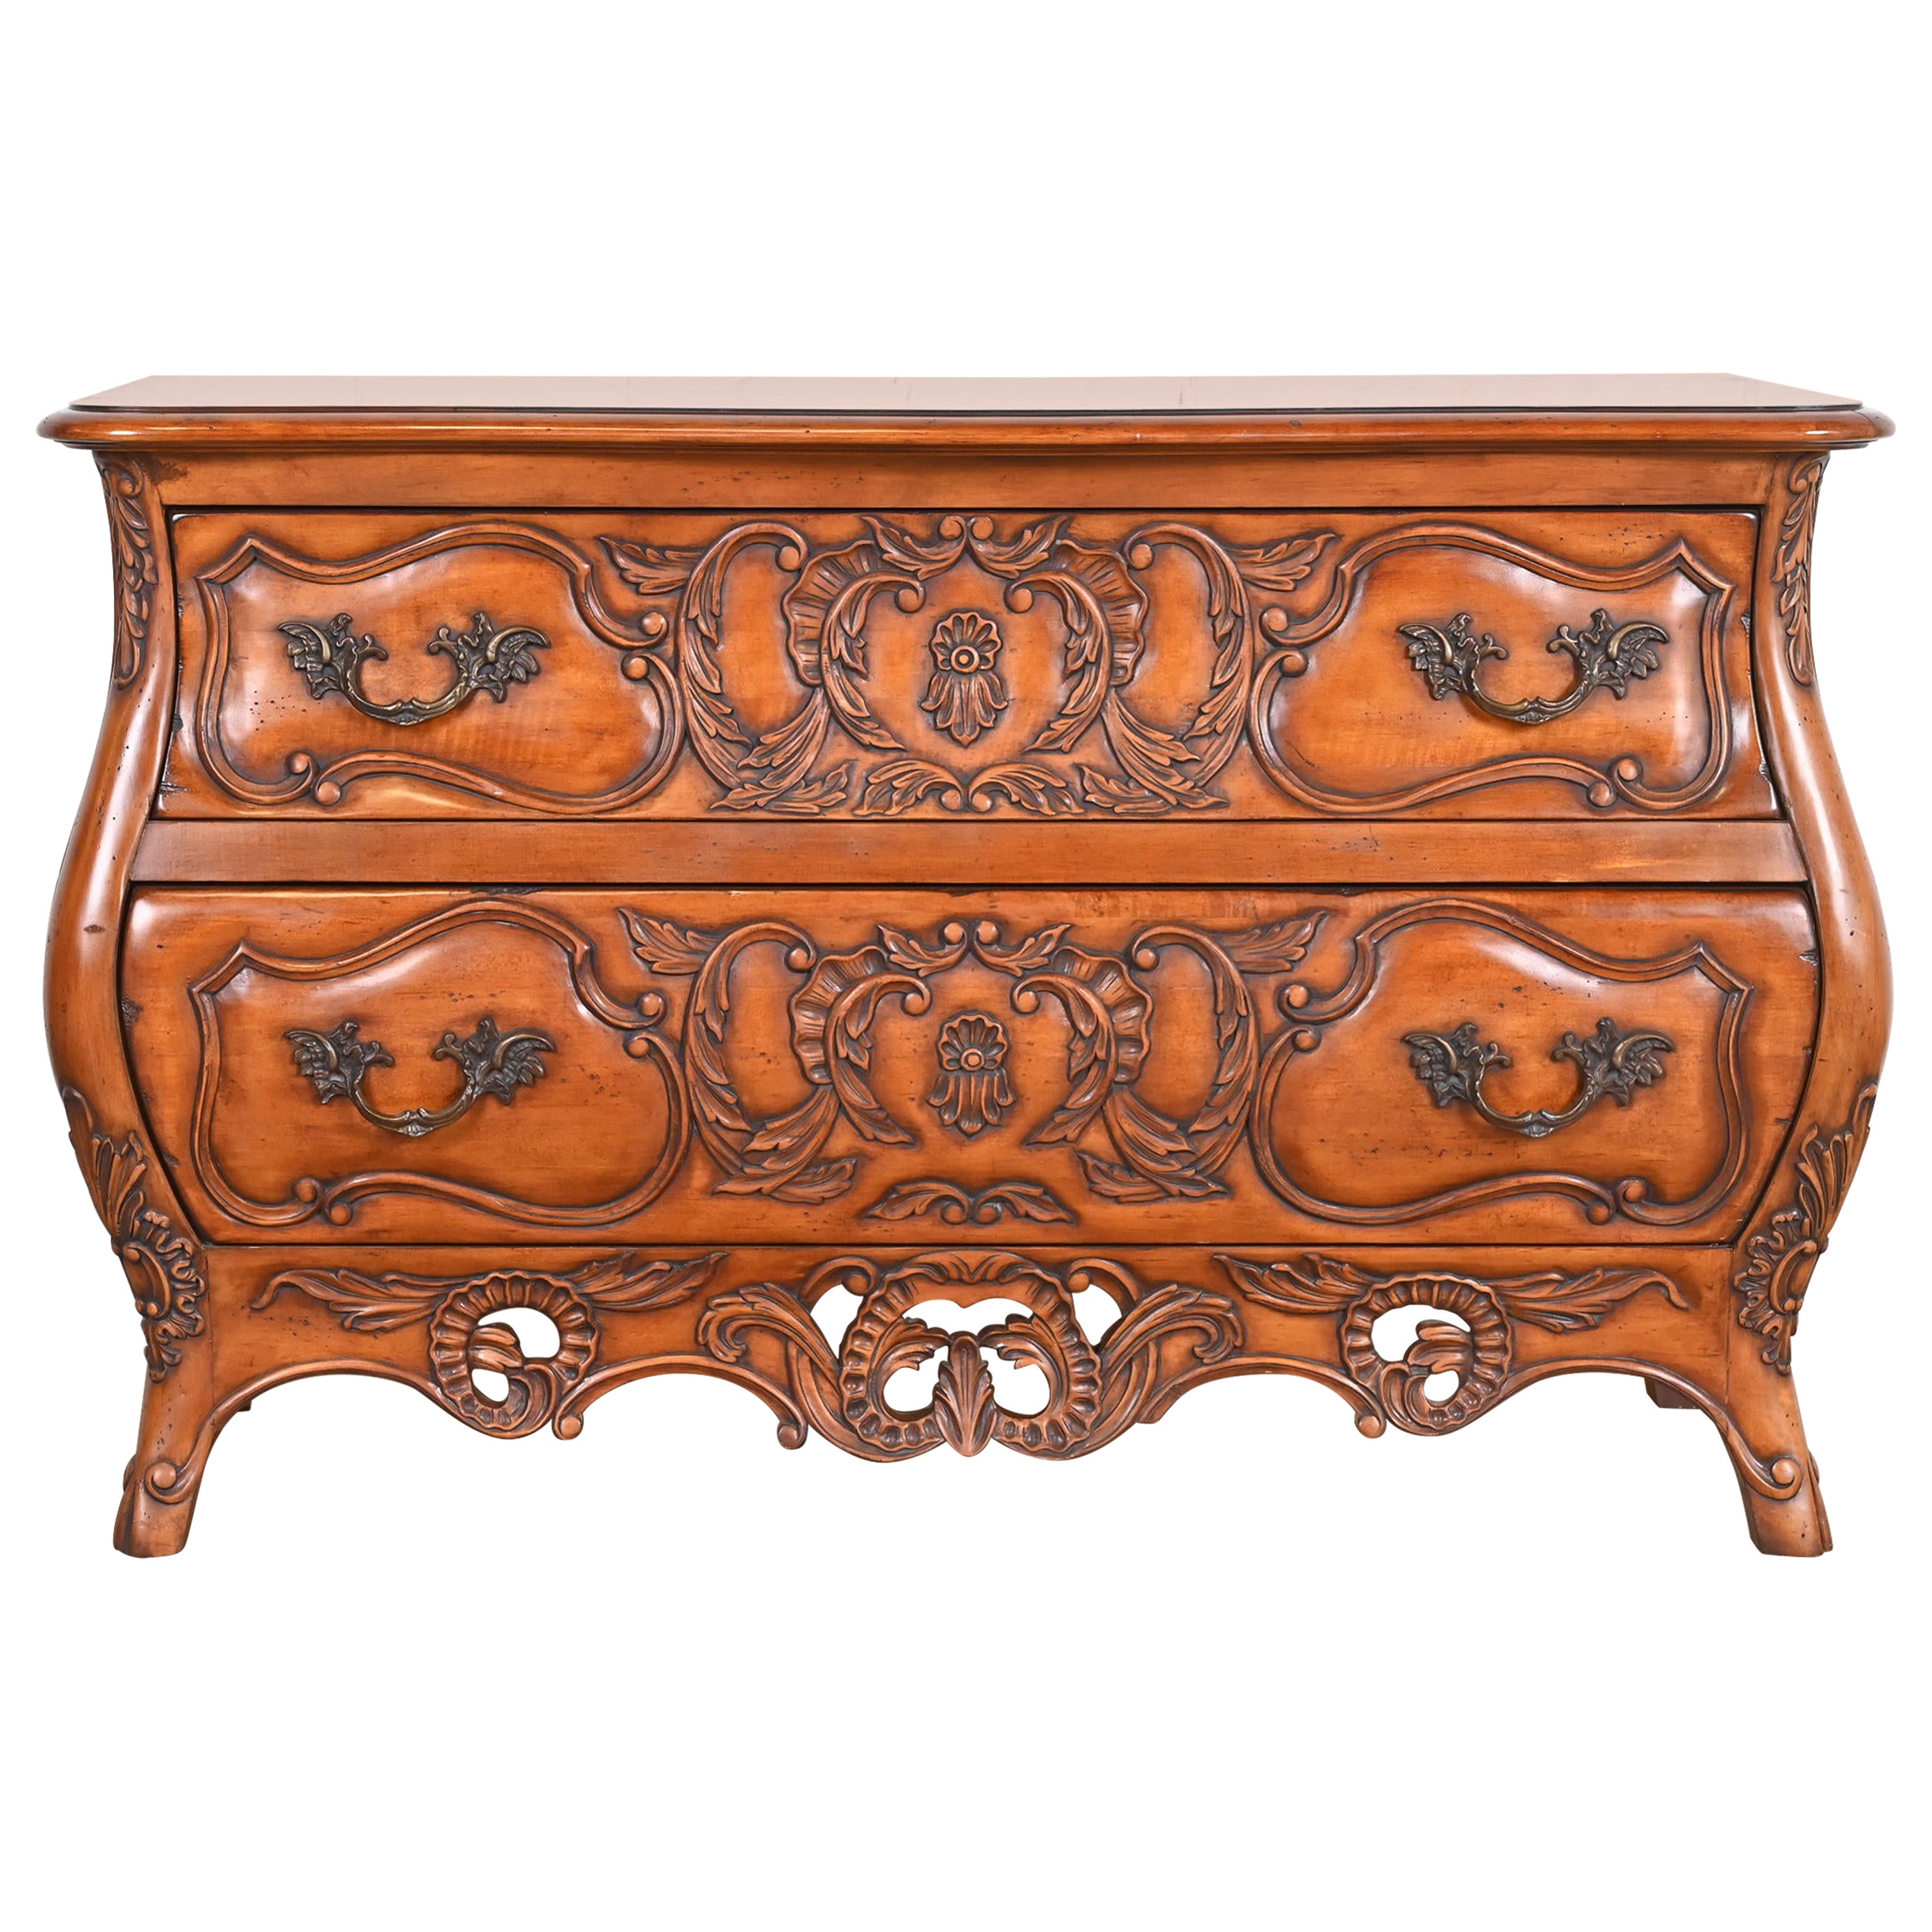 Italian Louis XV Carved Cherry Wood Commode or Bombay Chest